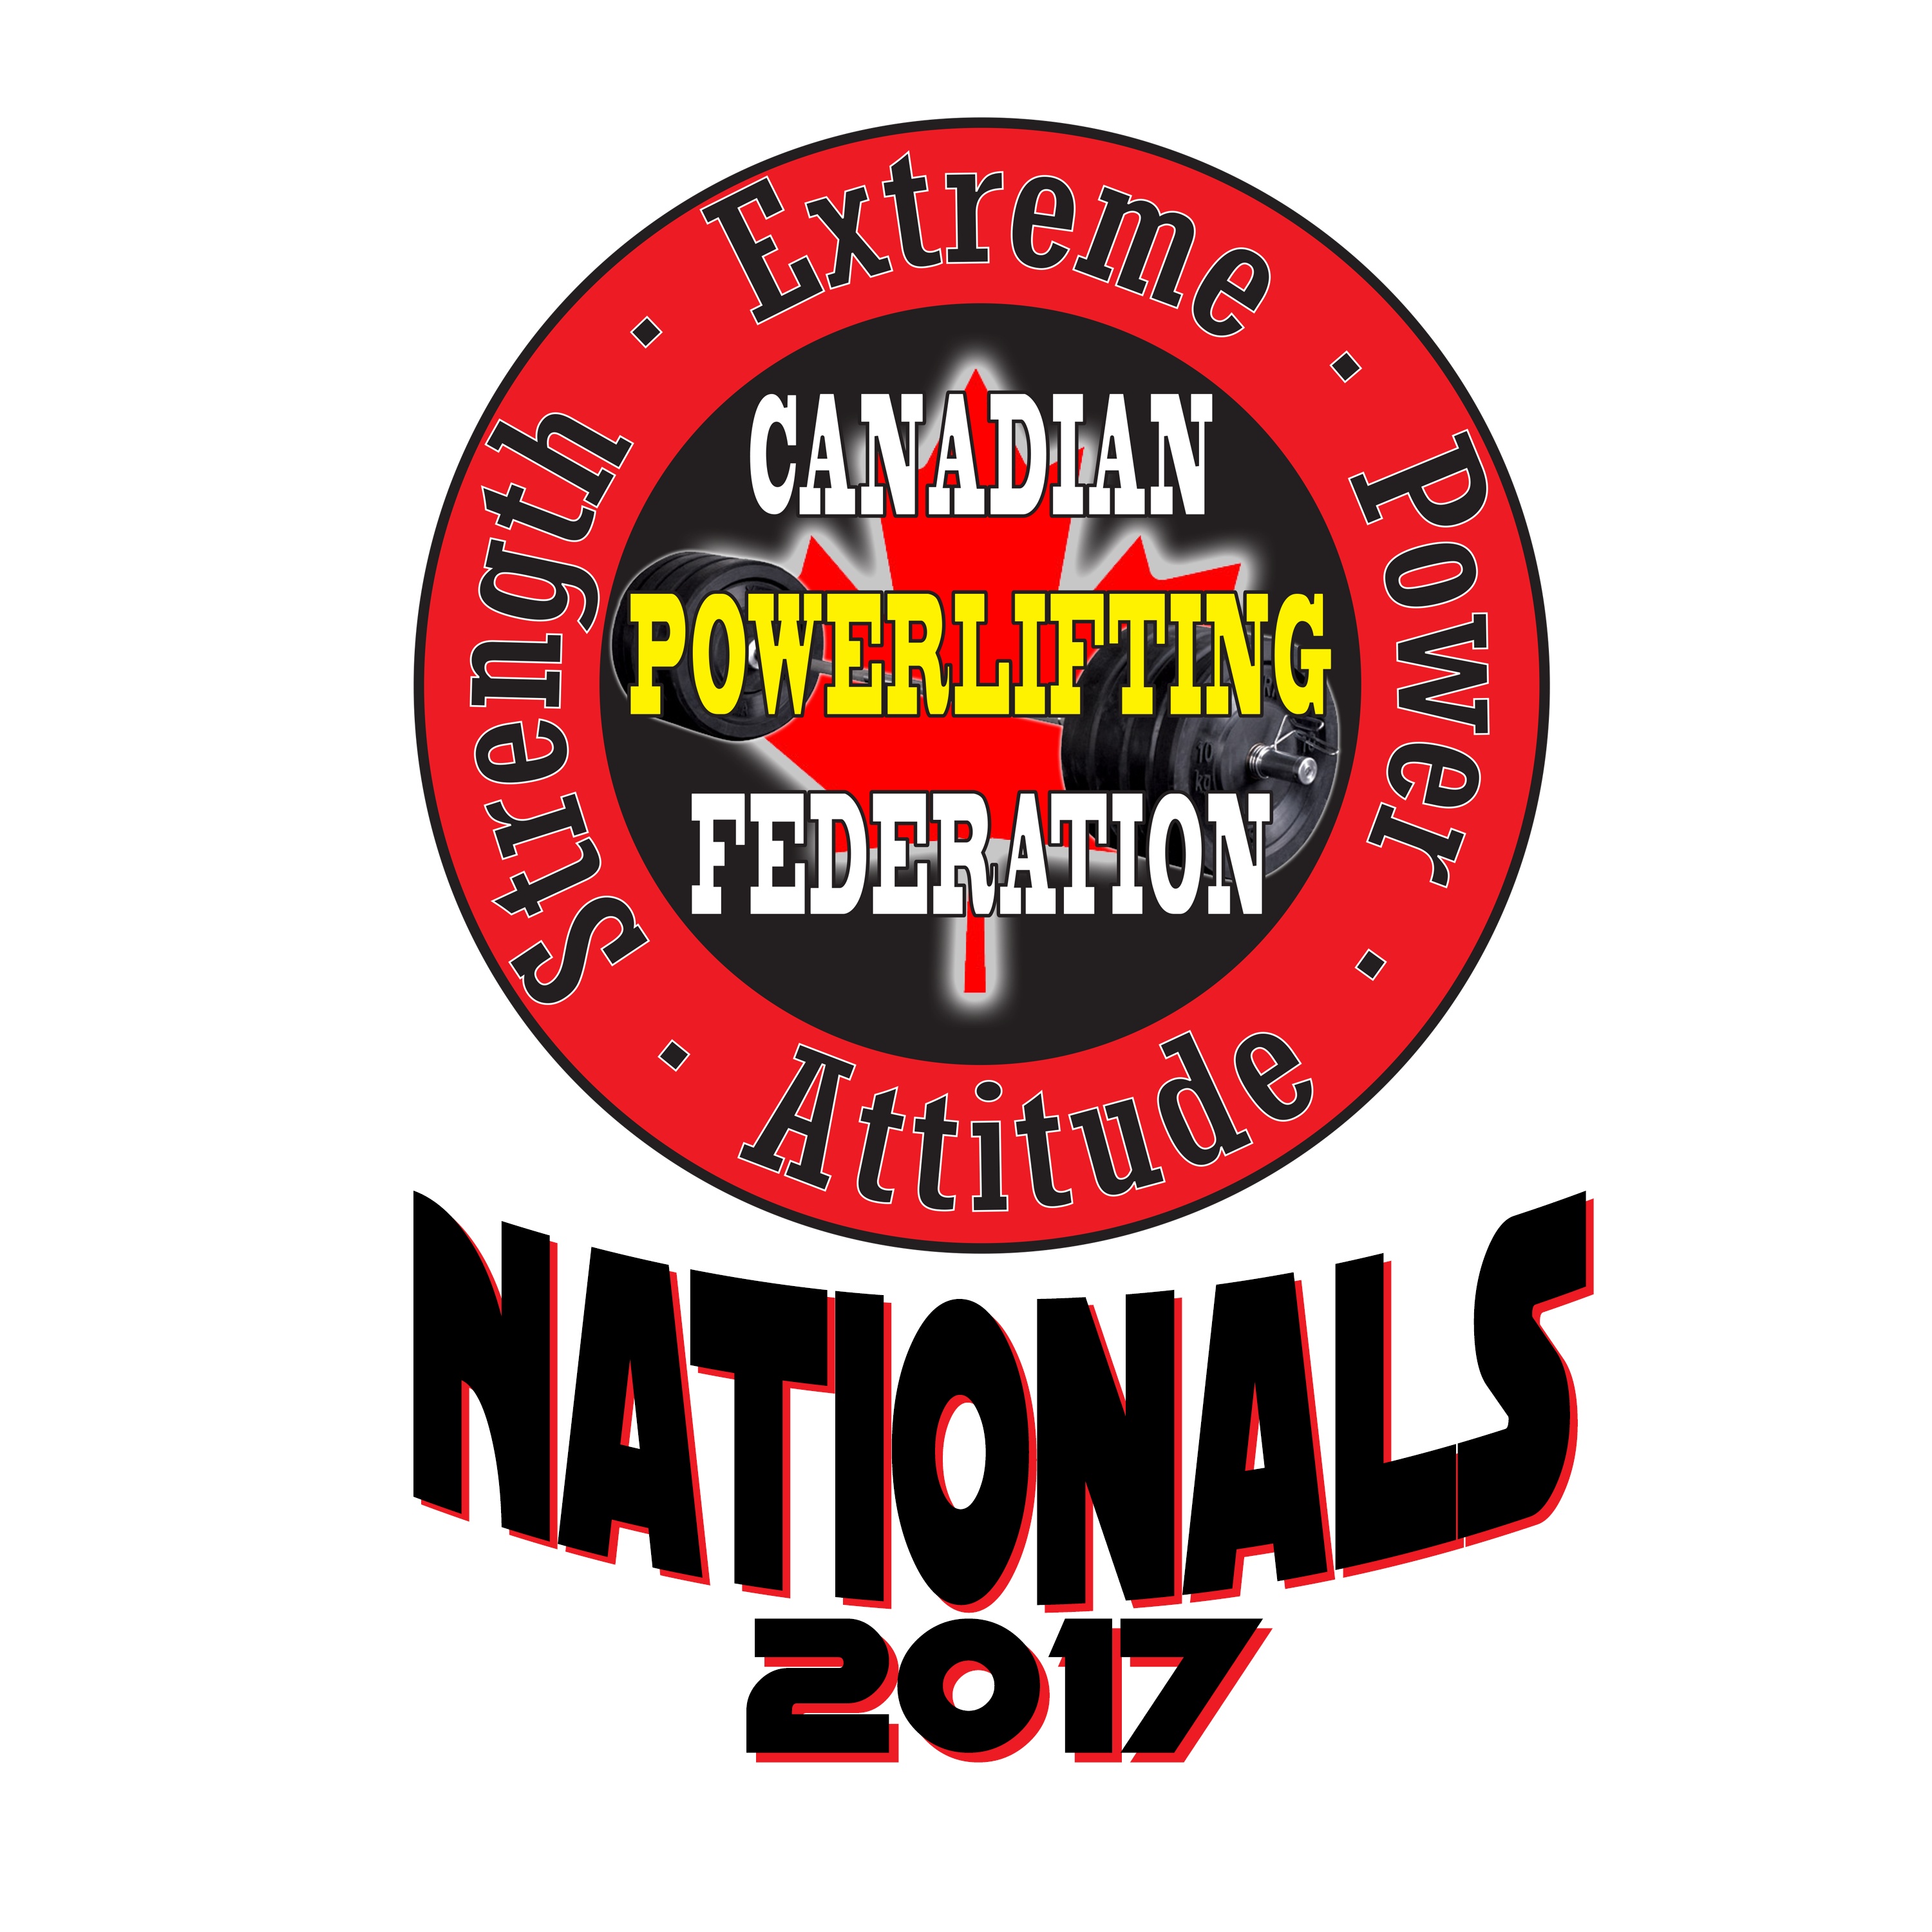 Canadian Powerlifting Federation Nationals 2017 SponsorMyEvent